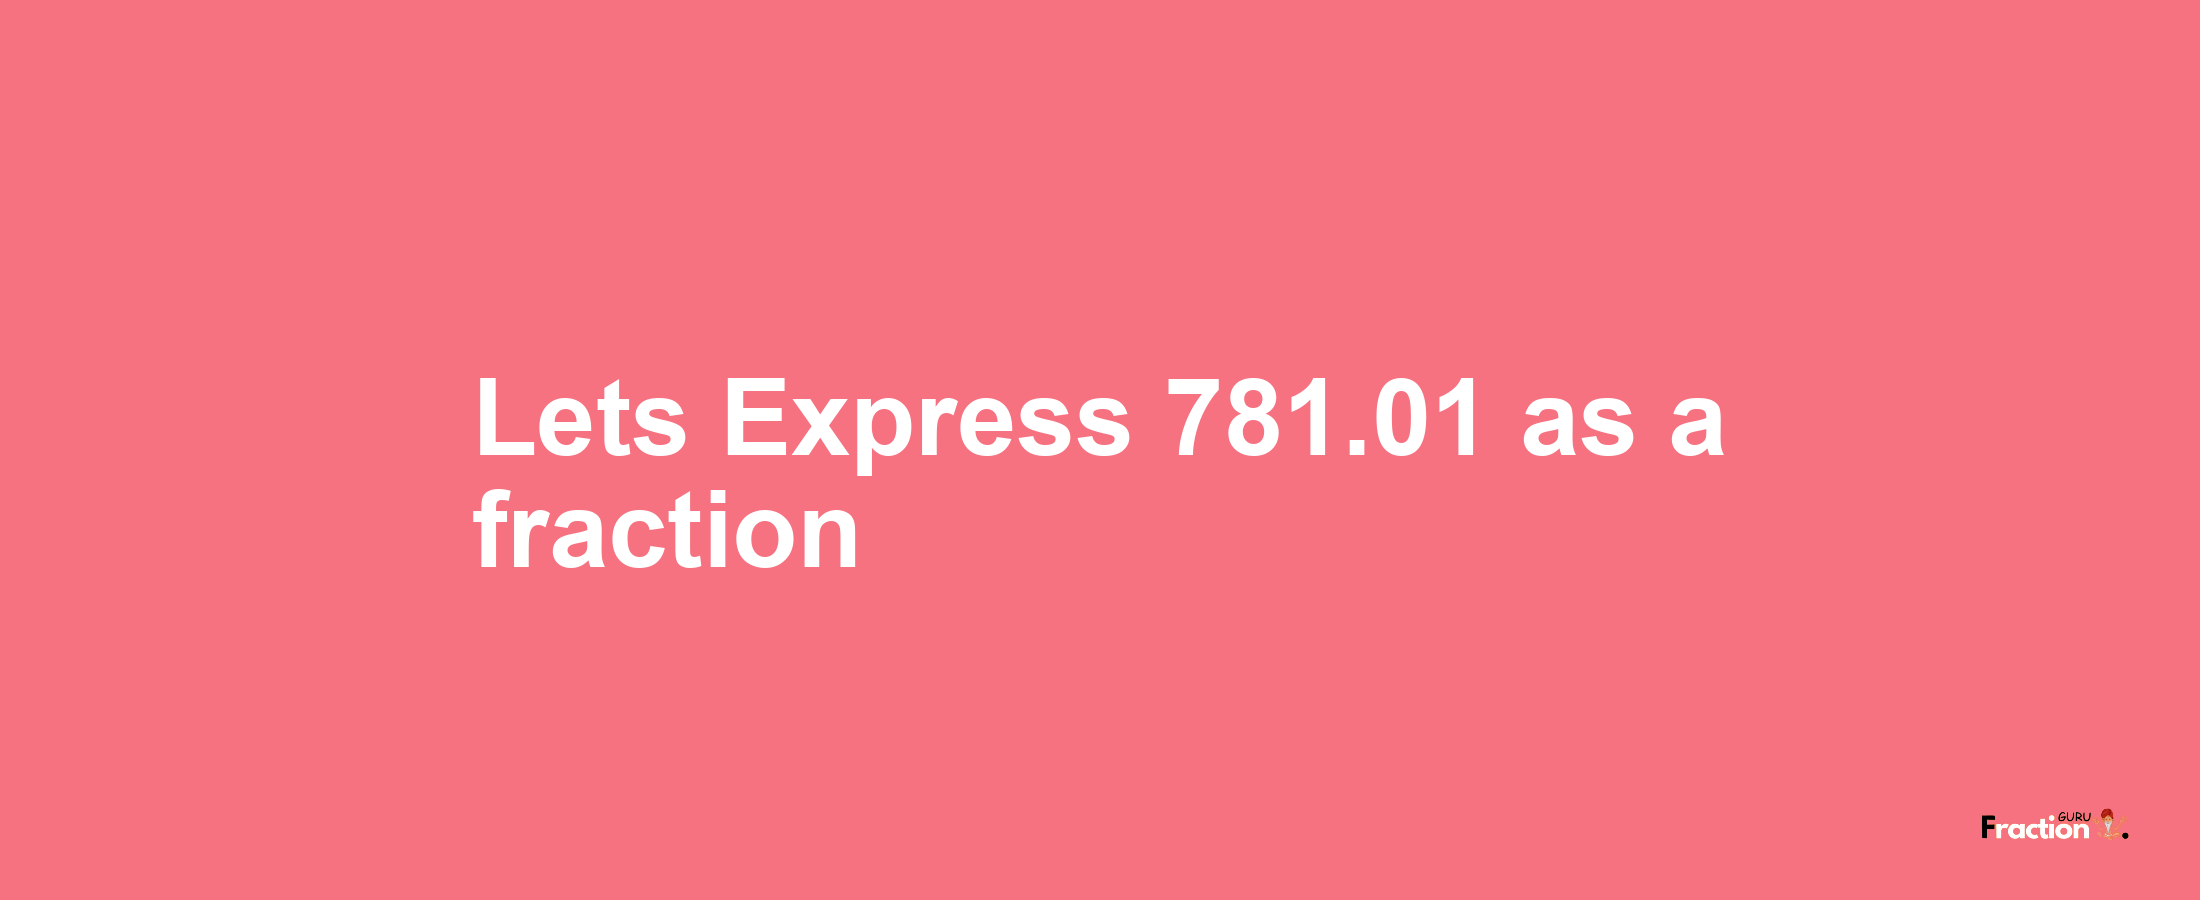 Lets Express 781.01 as afraction